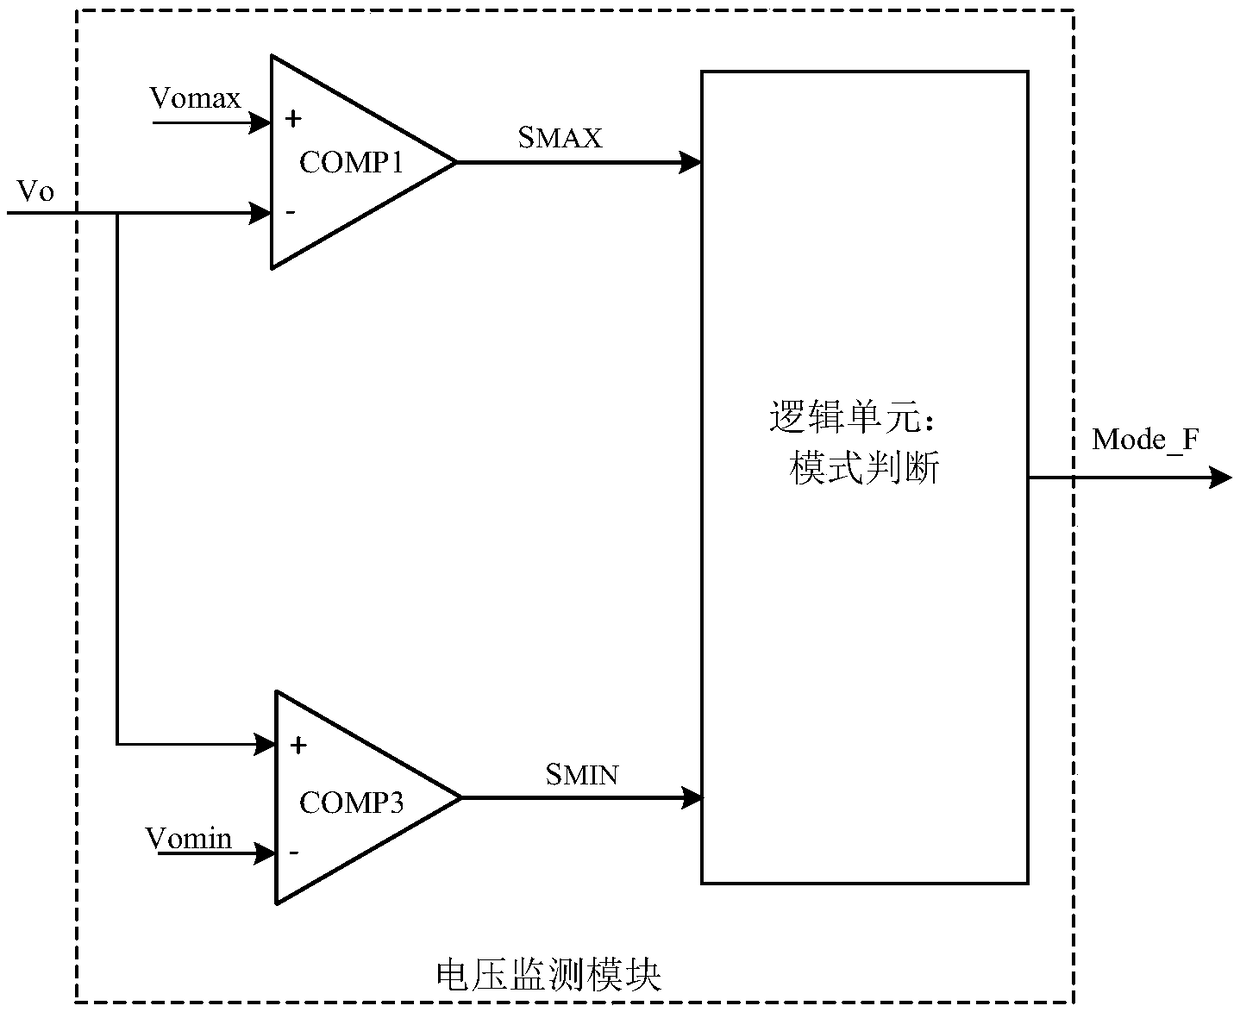 A control method for improving the output precision of a switching power supply